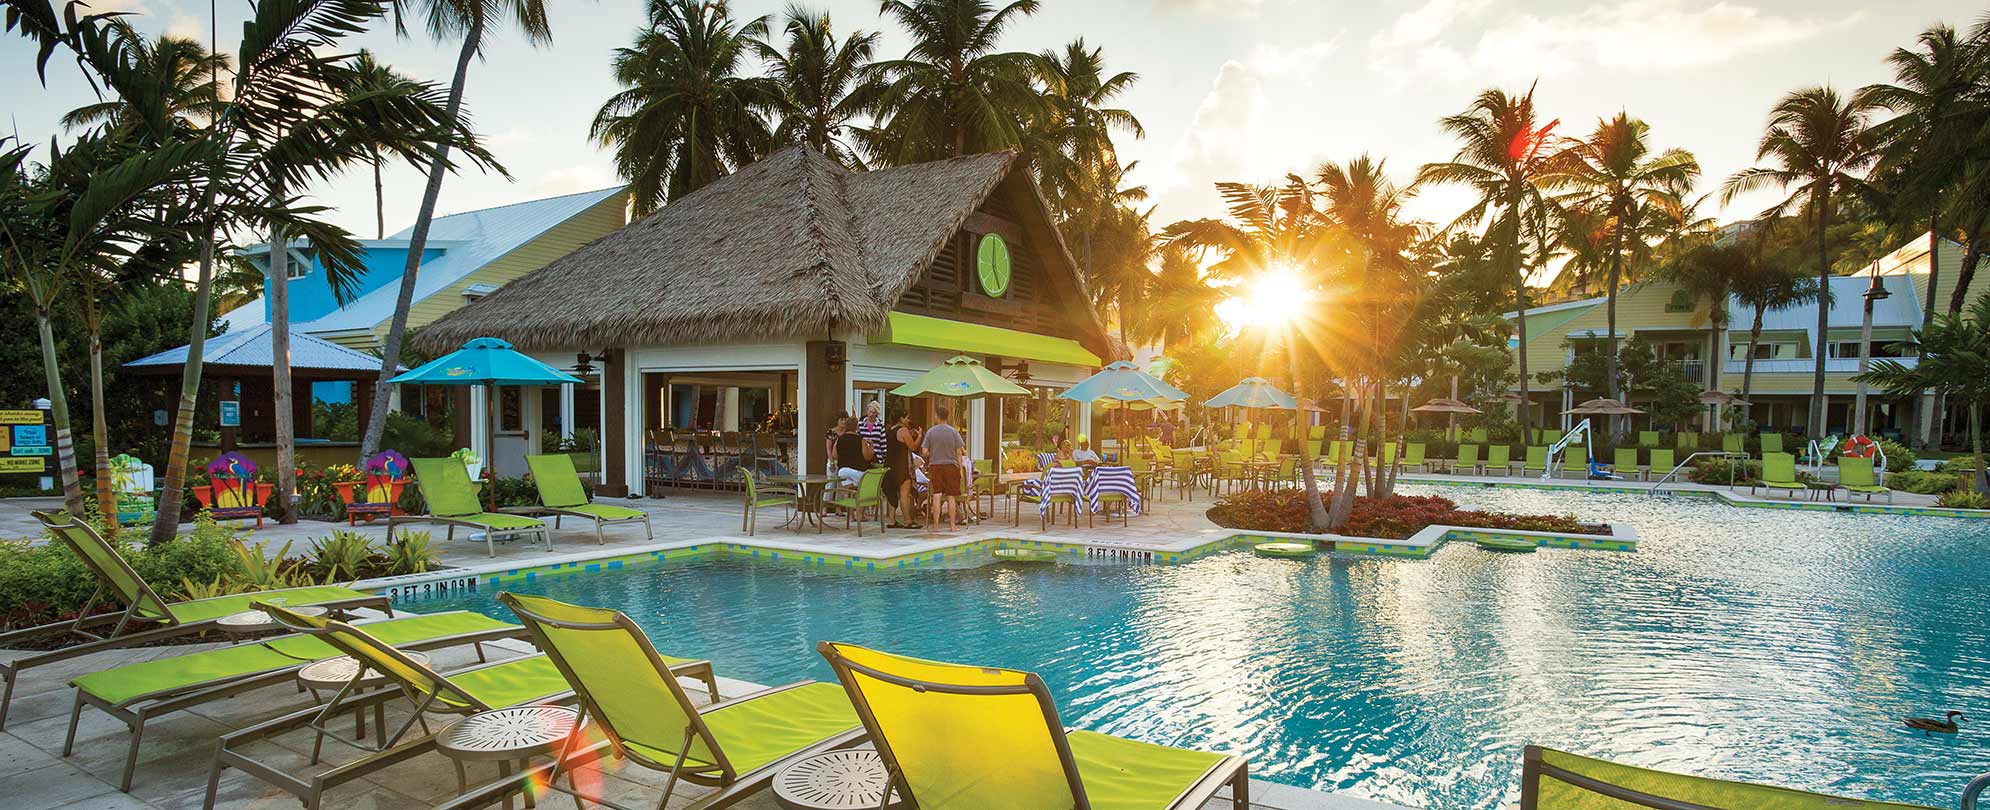 The sun sets on the pool, tiki bar, and bright green pool chairs at Margaritaville Vacation Club by Wyndham - St. Thomas.